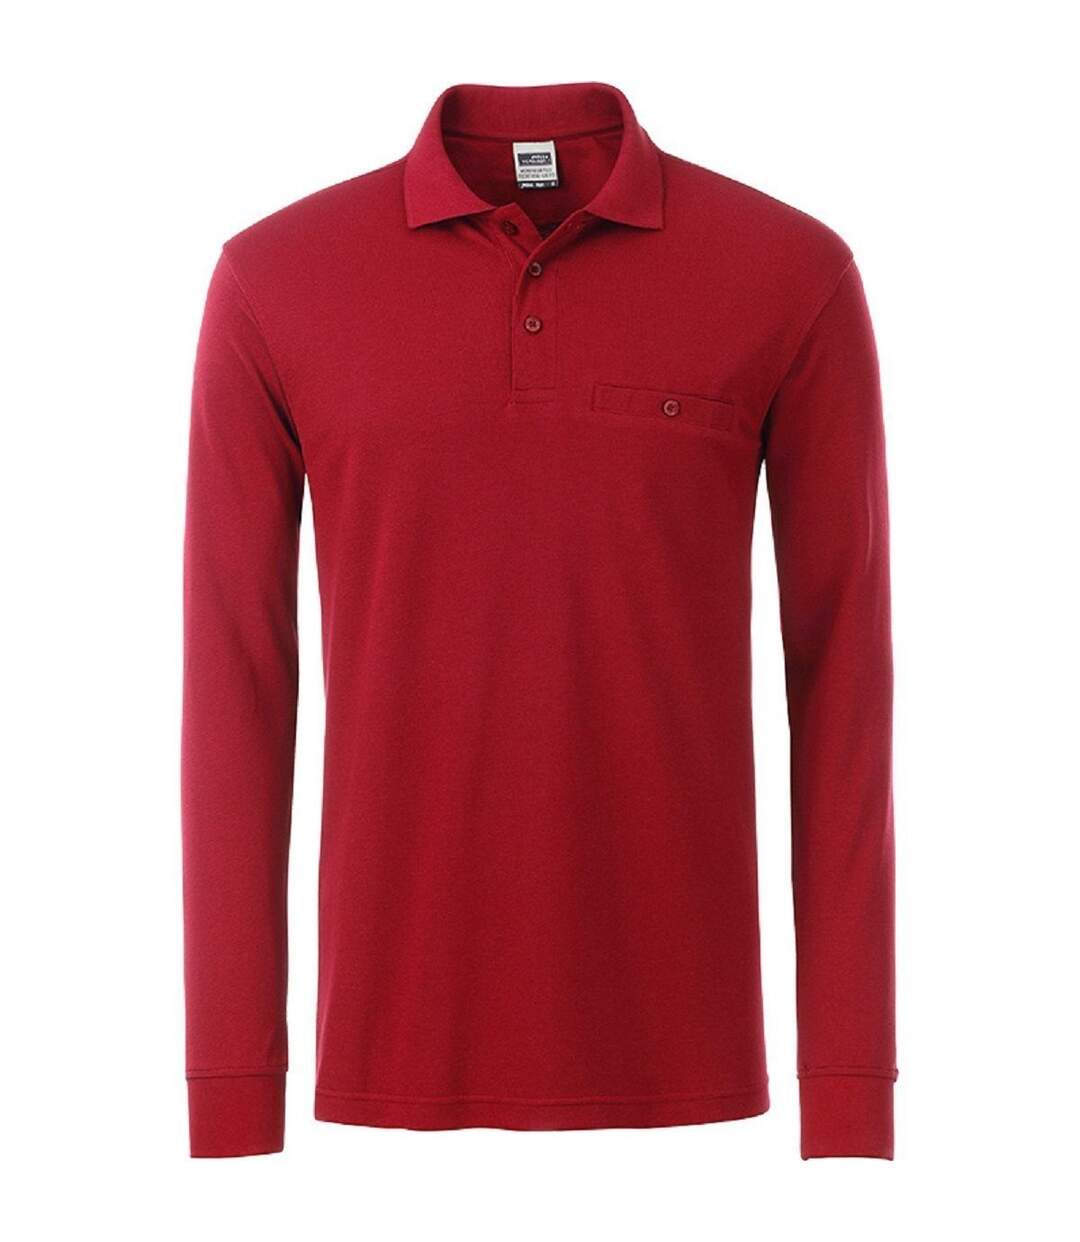 Polo homme poche poitrine manches longues - JN866 - rouge - workwear